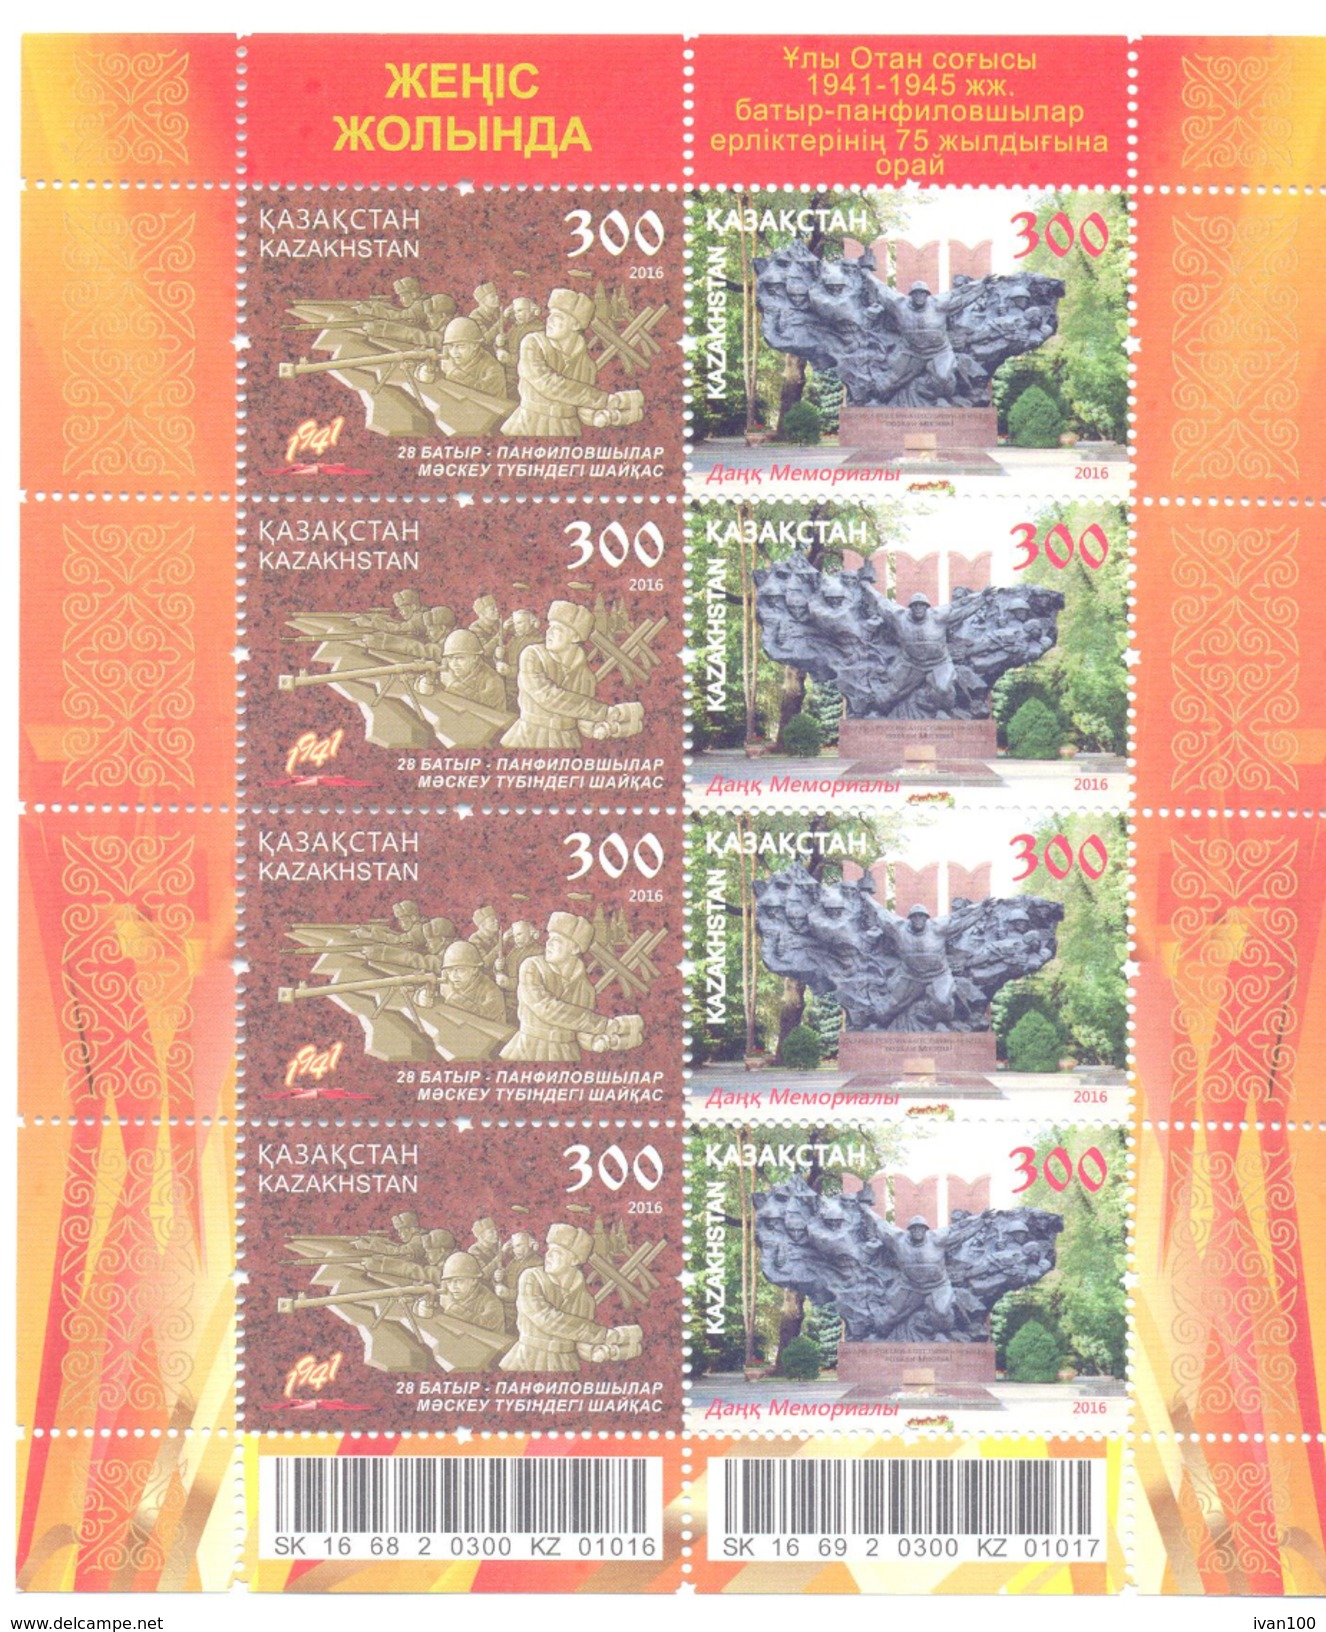 2016. Kazakhstan, 75y Of Feat Panfilov Heroes, Joint Issue With Russia, Sheetlet,  Mint/** - Kazajstán